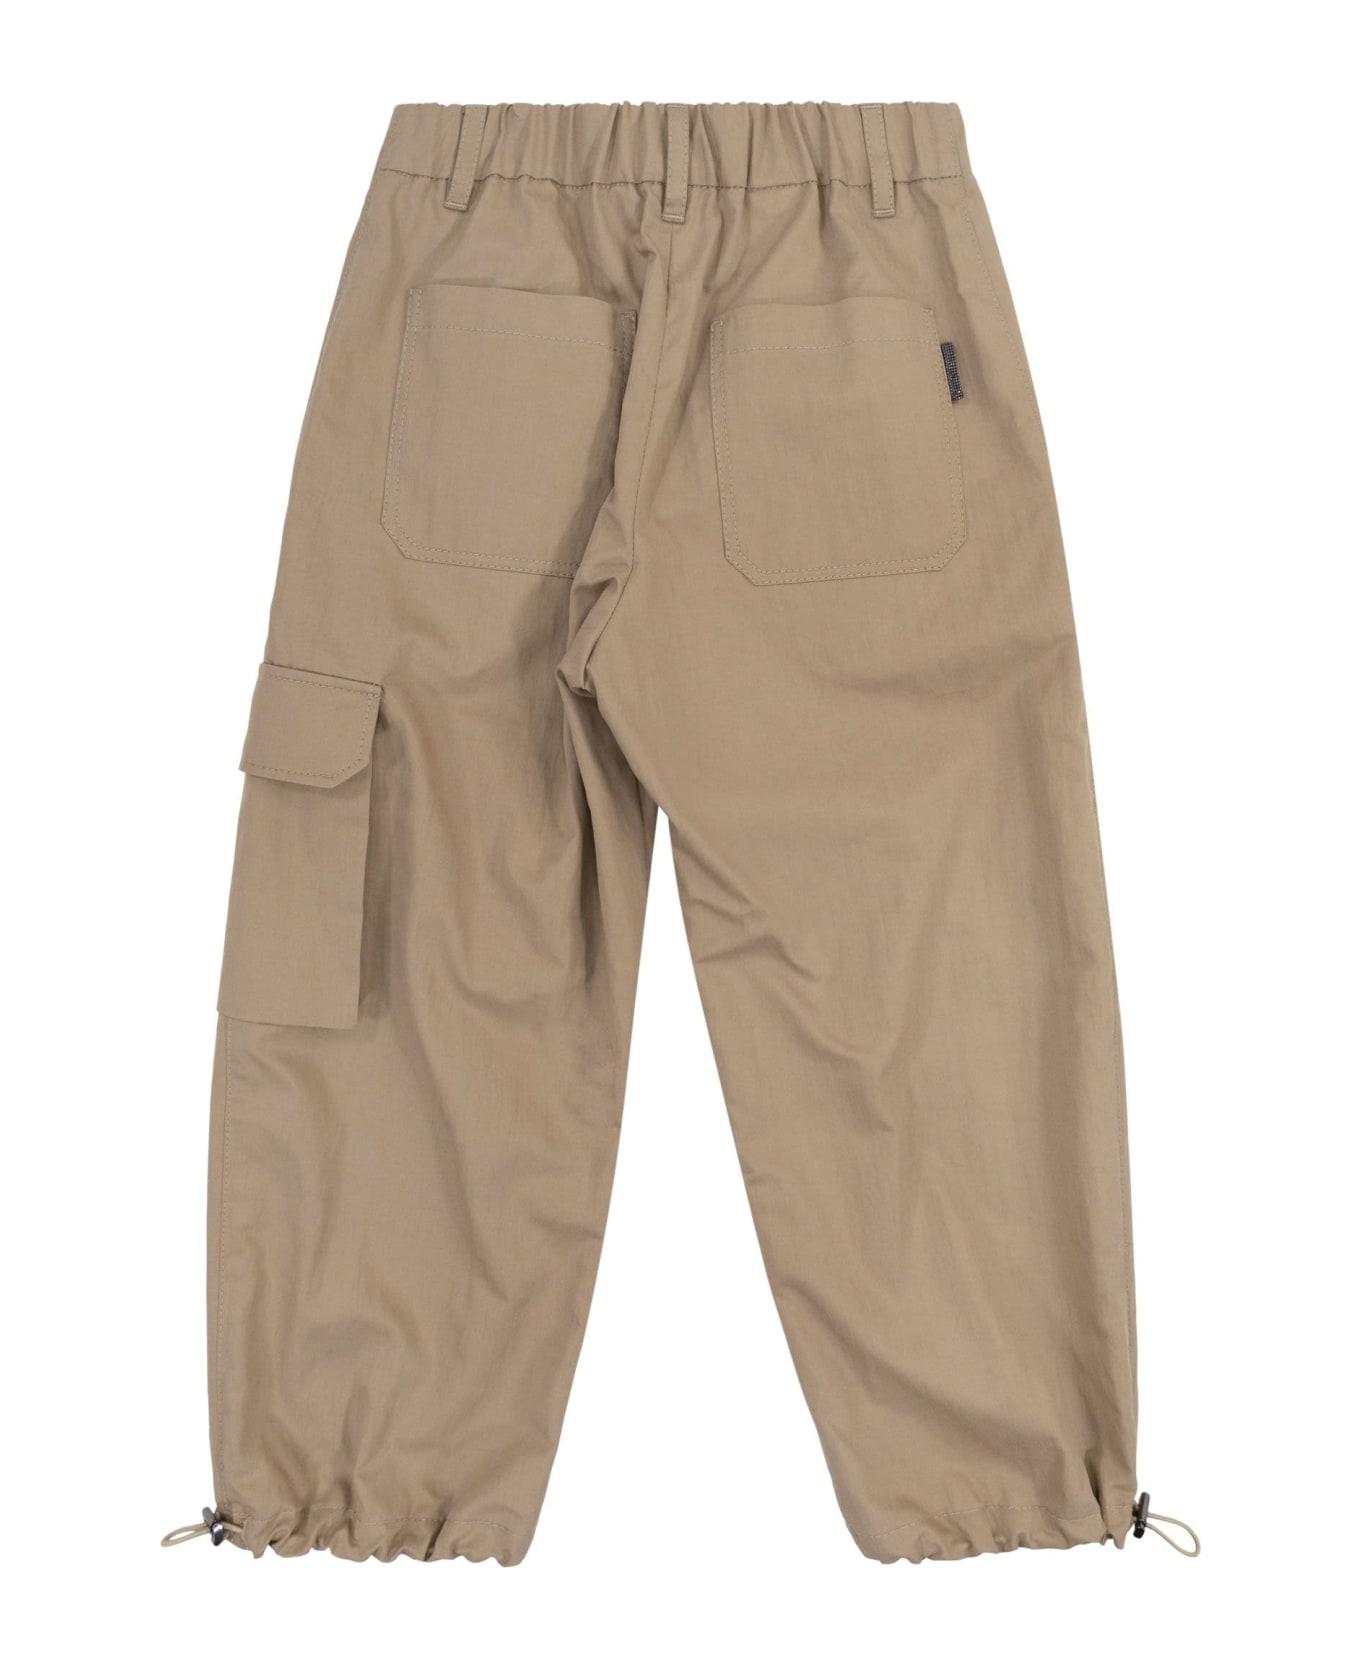 Brunello Cucinelli Cotton Cargo Pocket Trousers - Cookie ボトムス